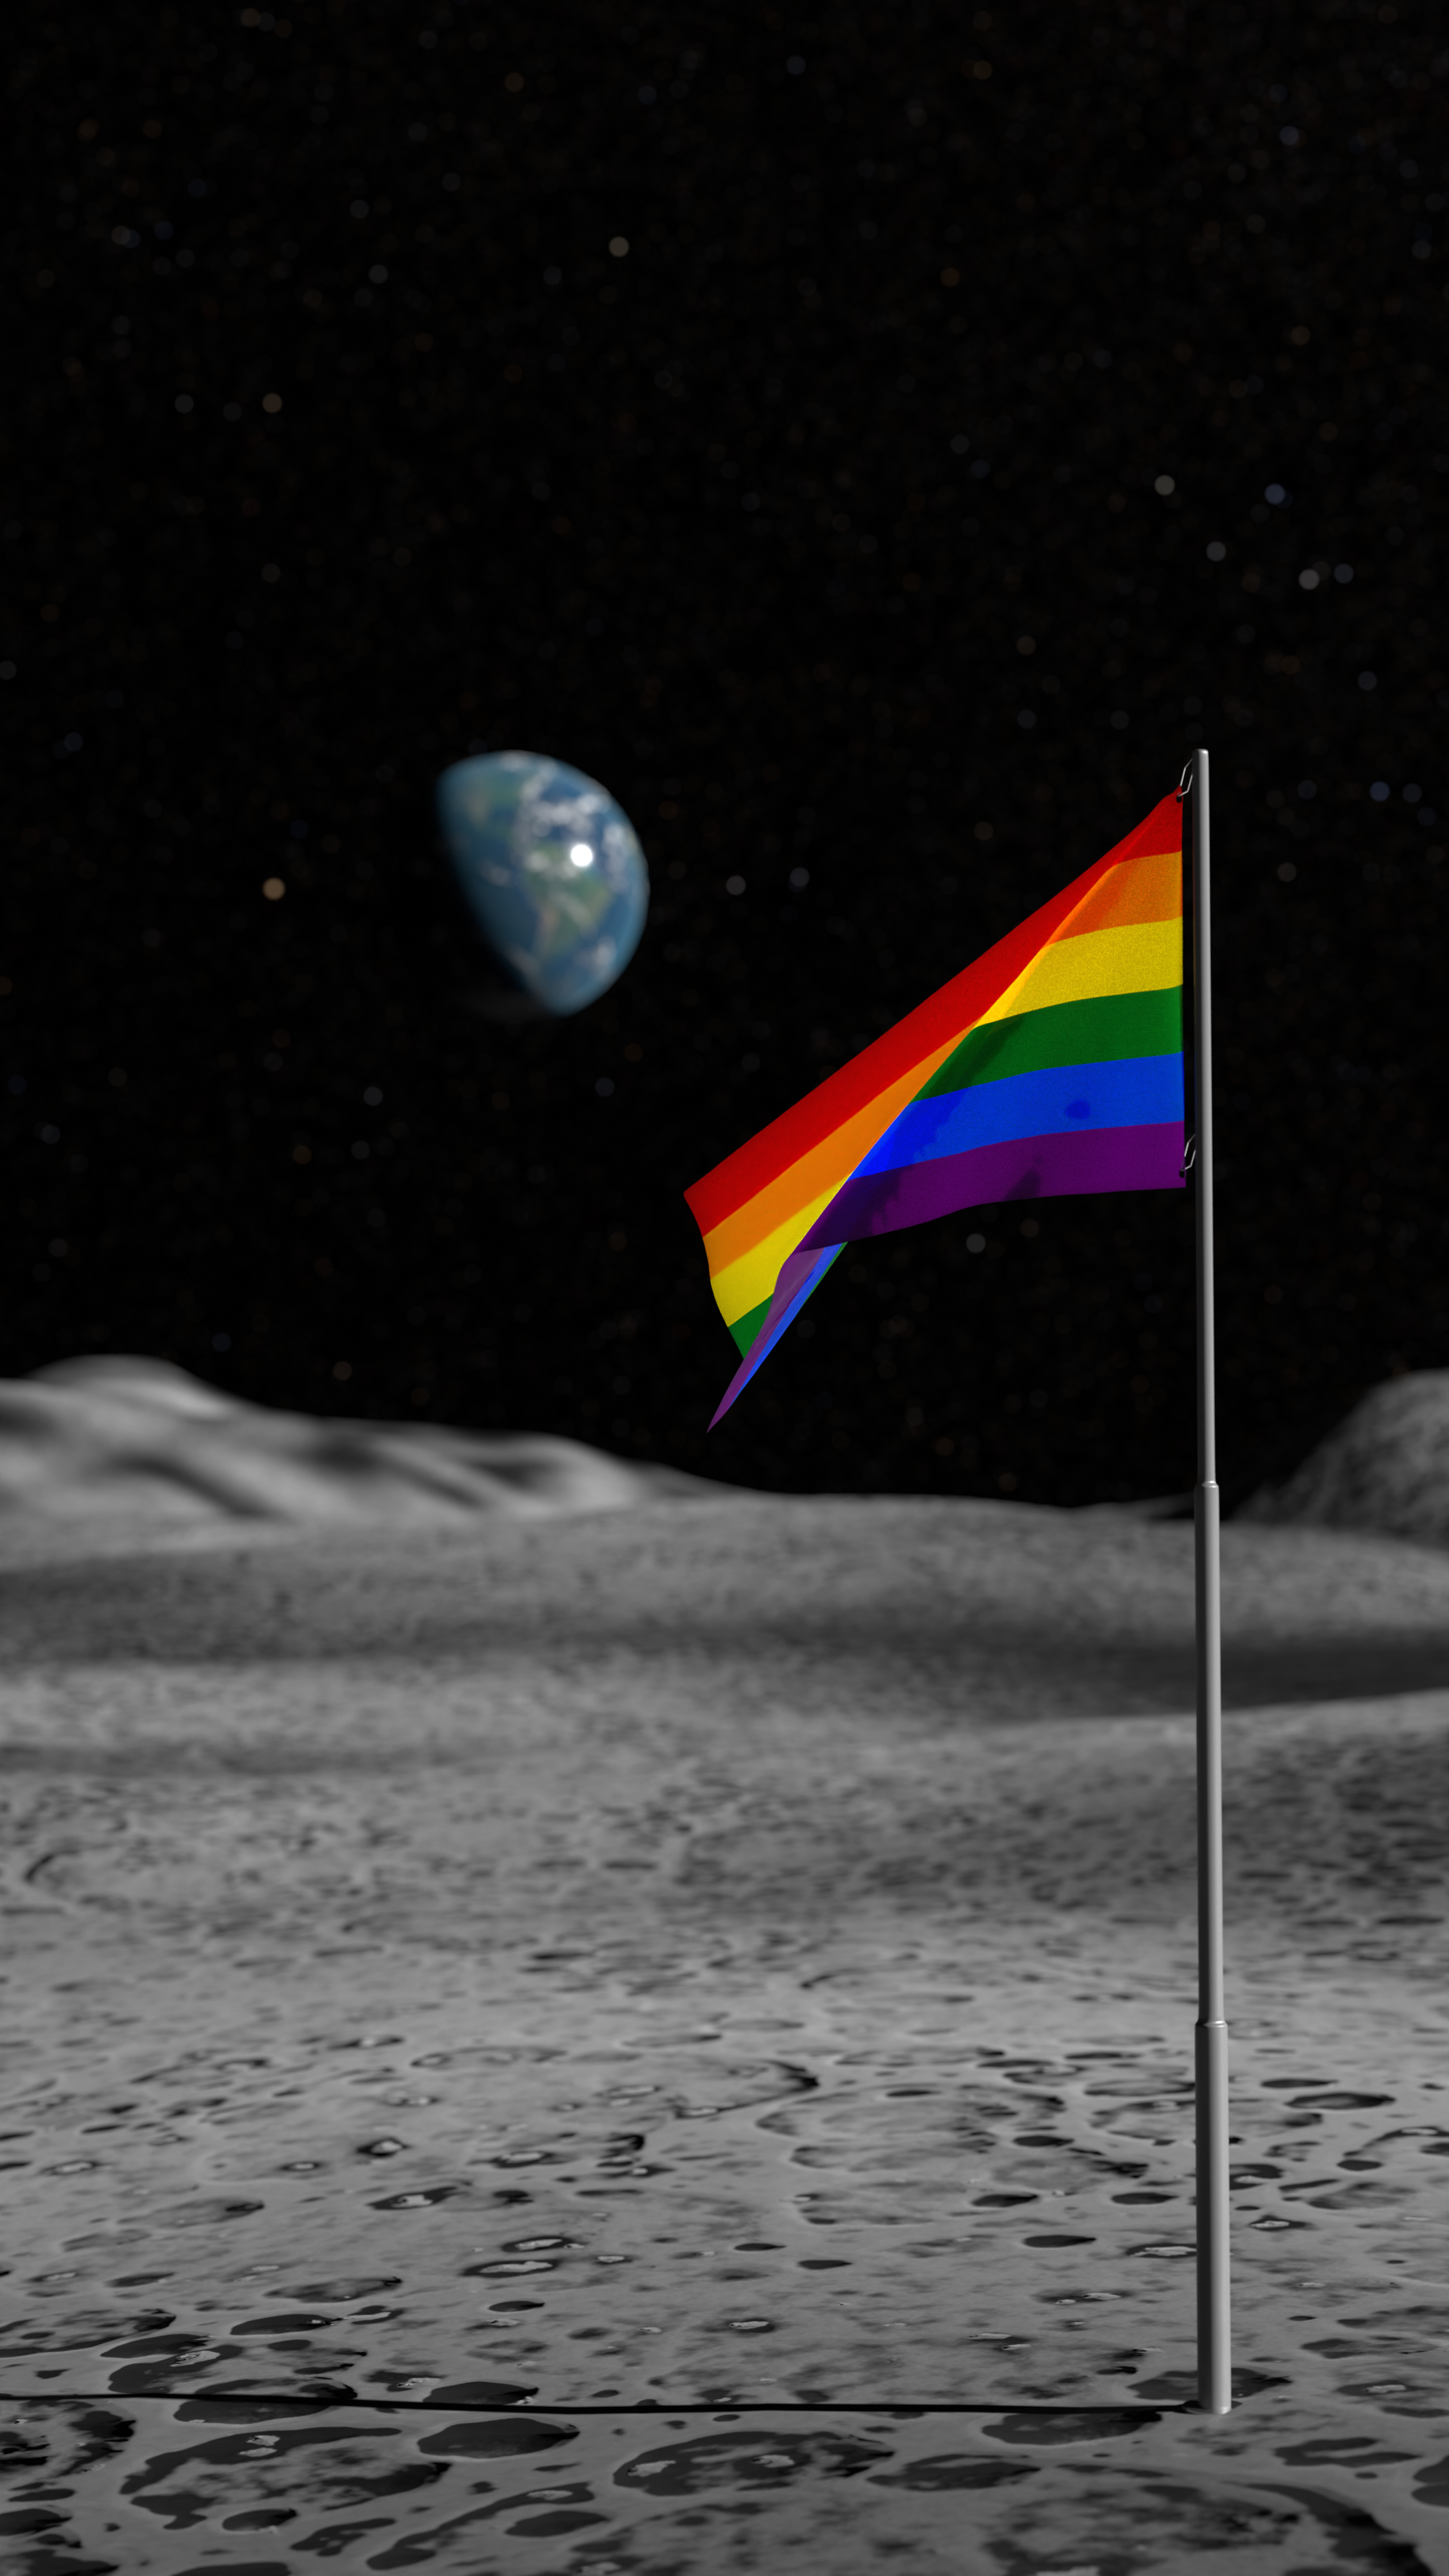 Moon with Flags preview image 2